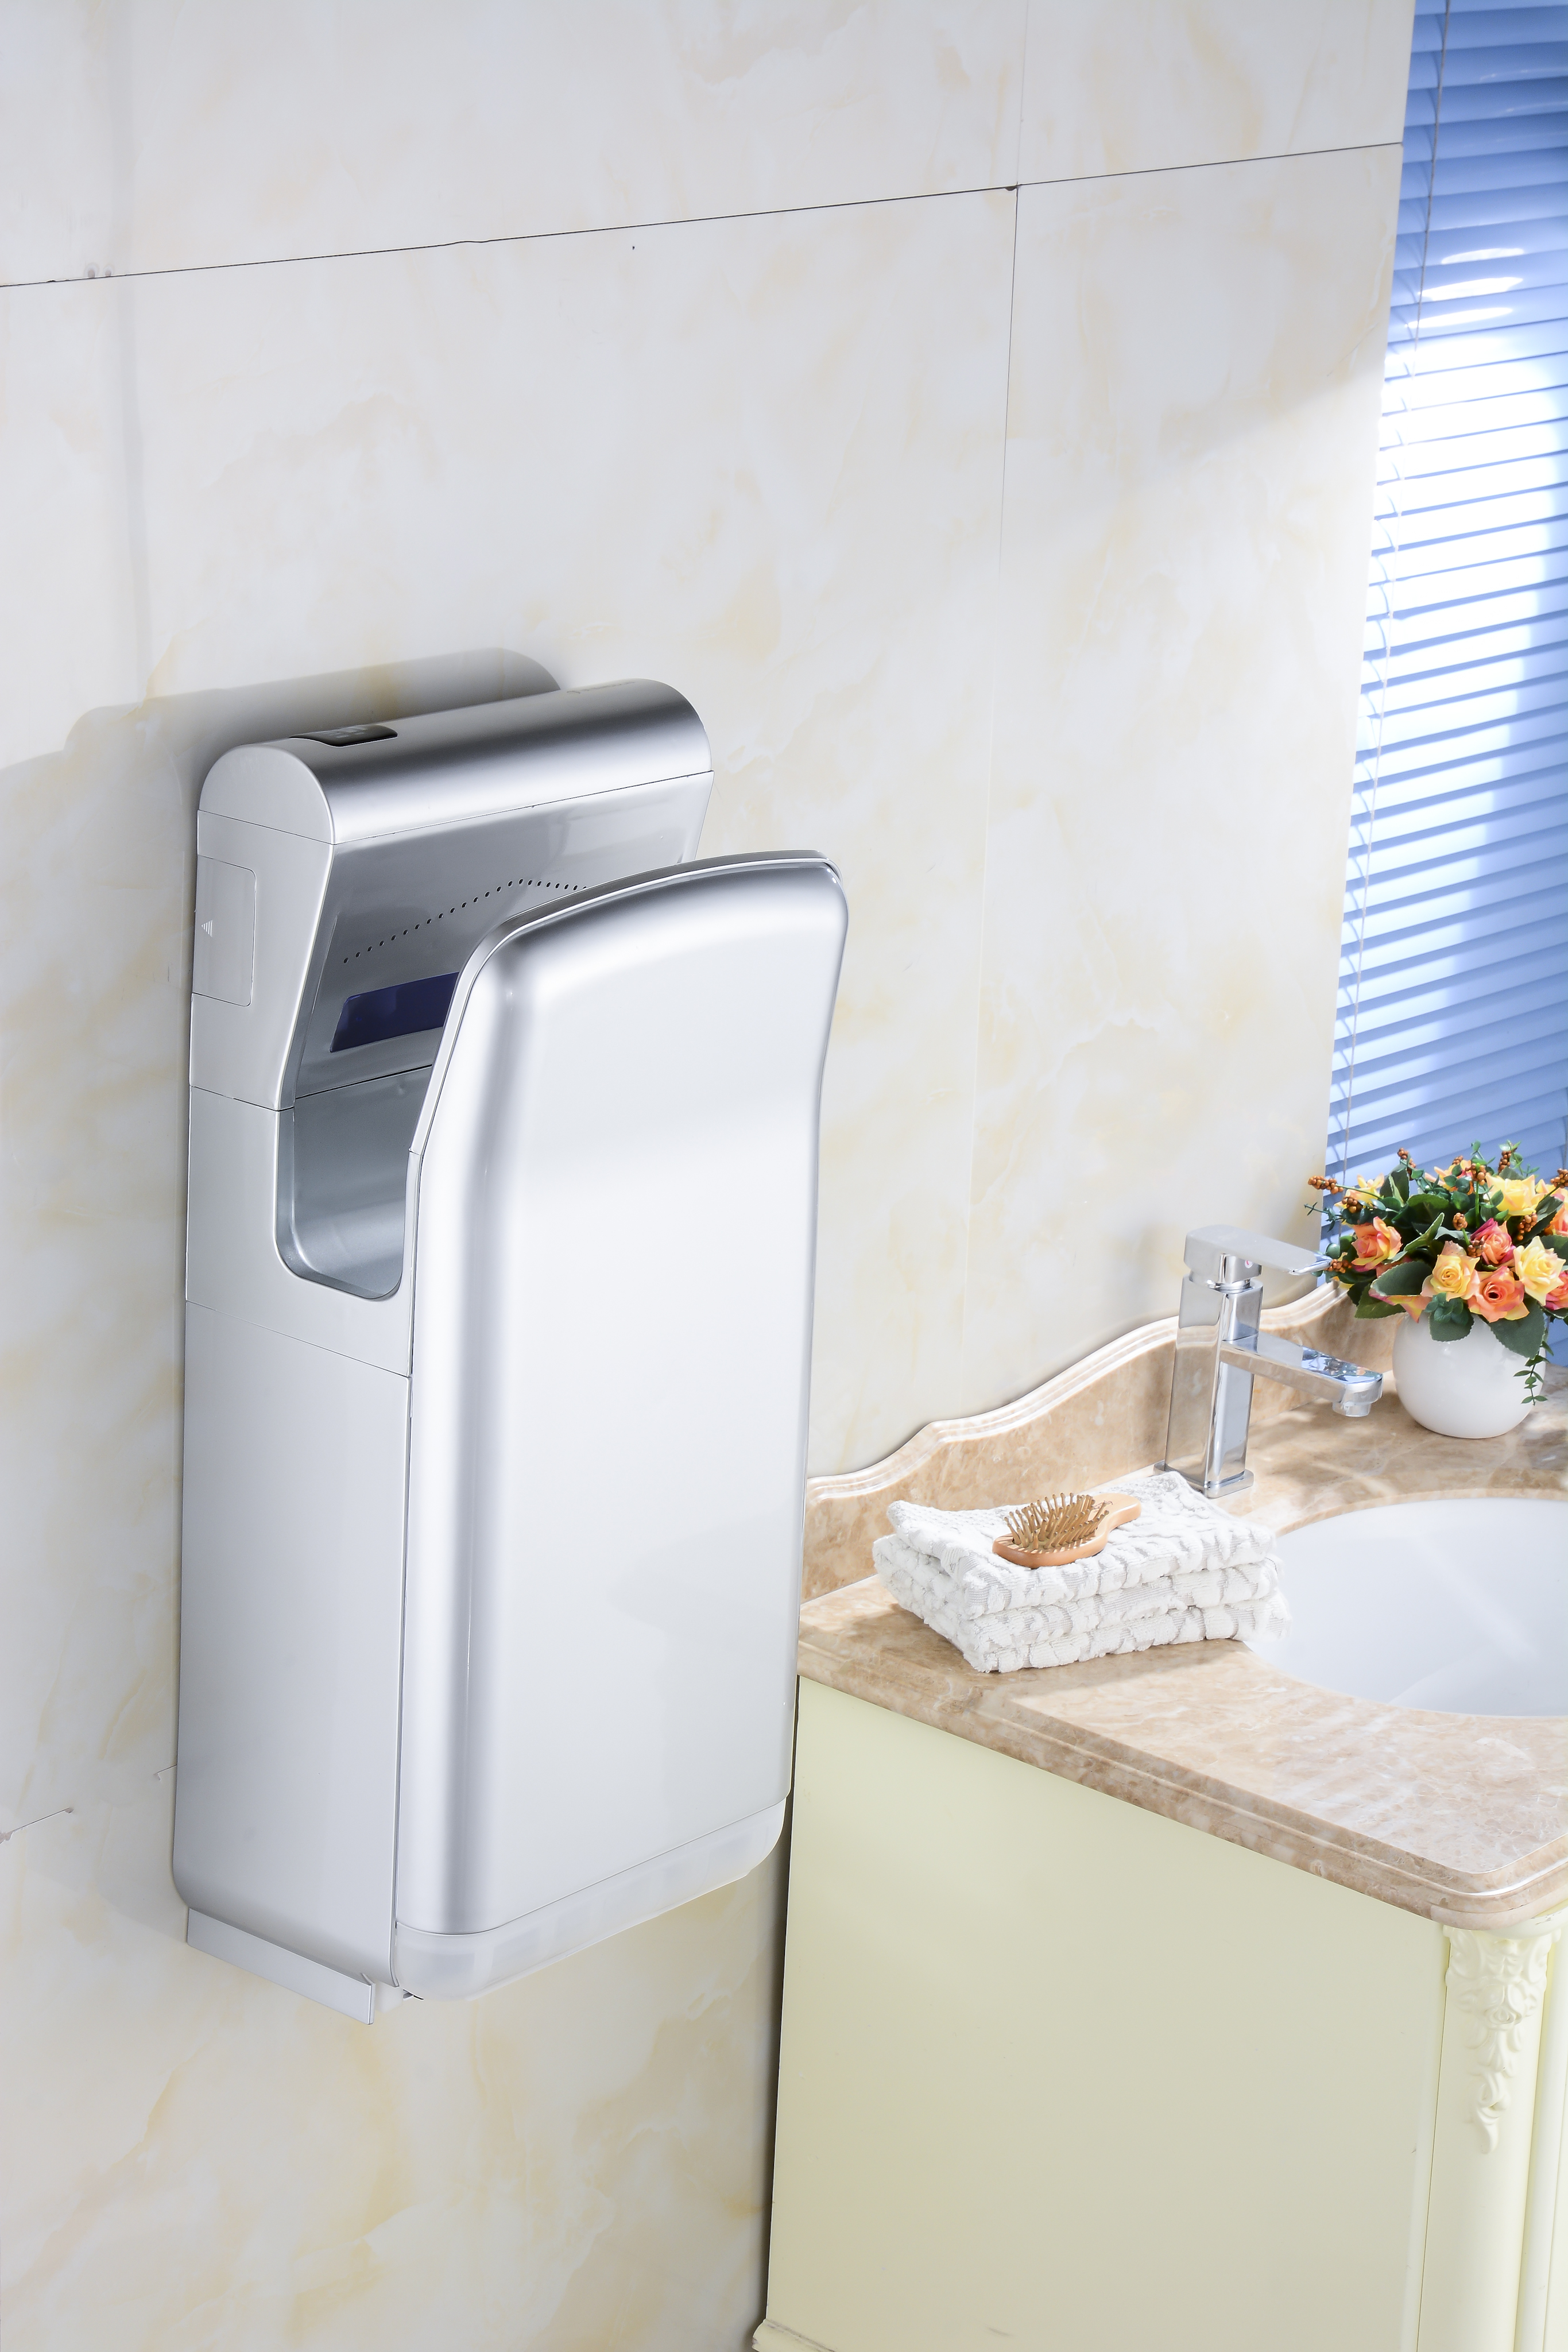 High Speed Plastic Automatic Hand Dryer